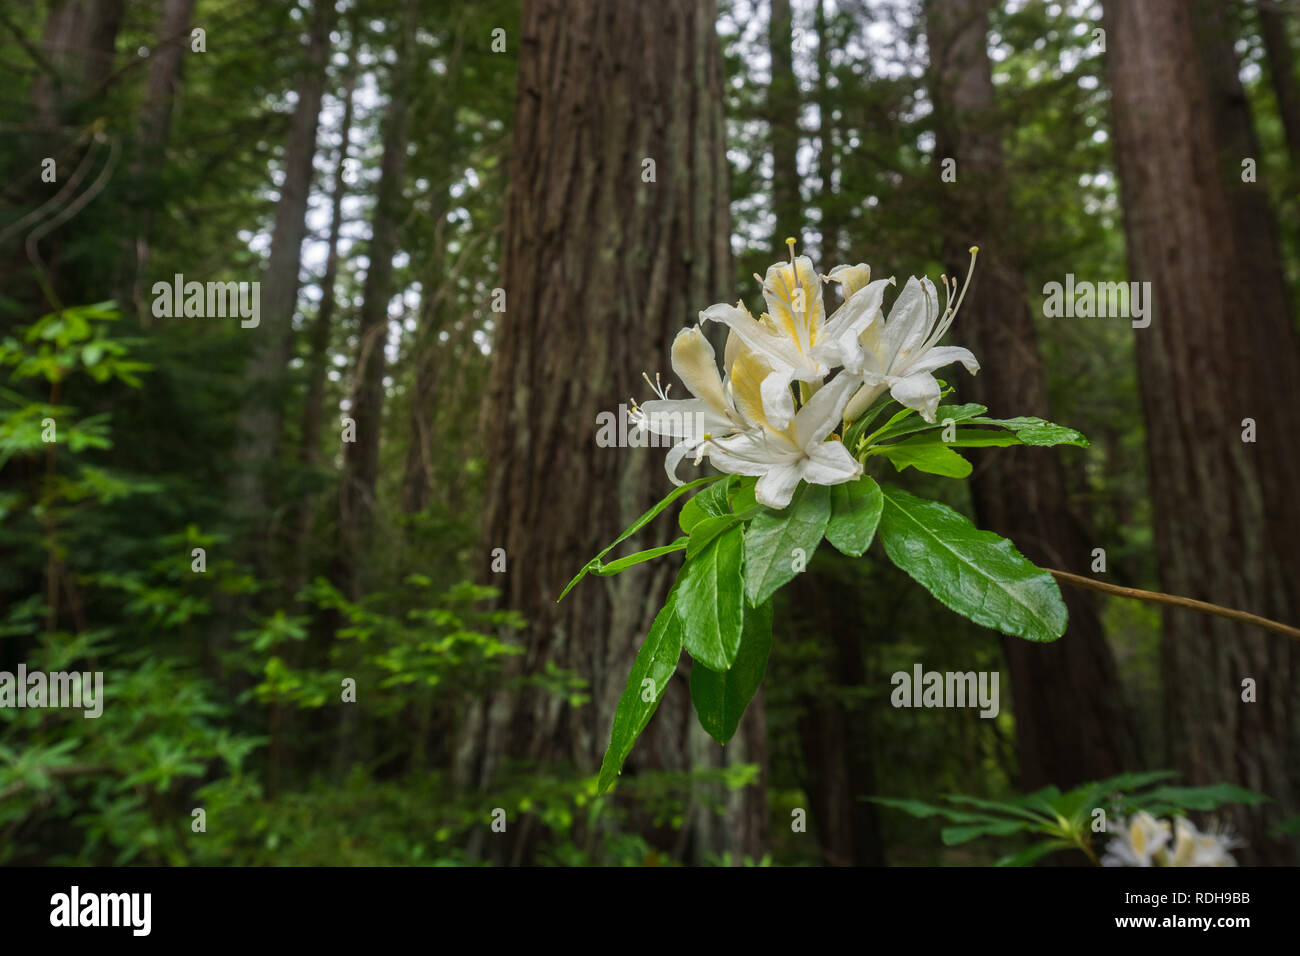 Western Azalea (Rhododendron occidentale) flowers on a redwood trees forest background, Big Basin Redwoods State Park, California Stock Photo